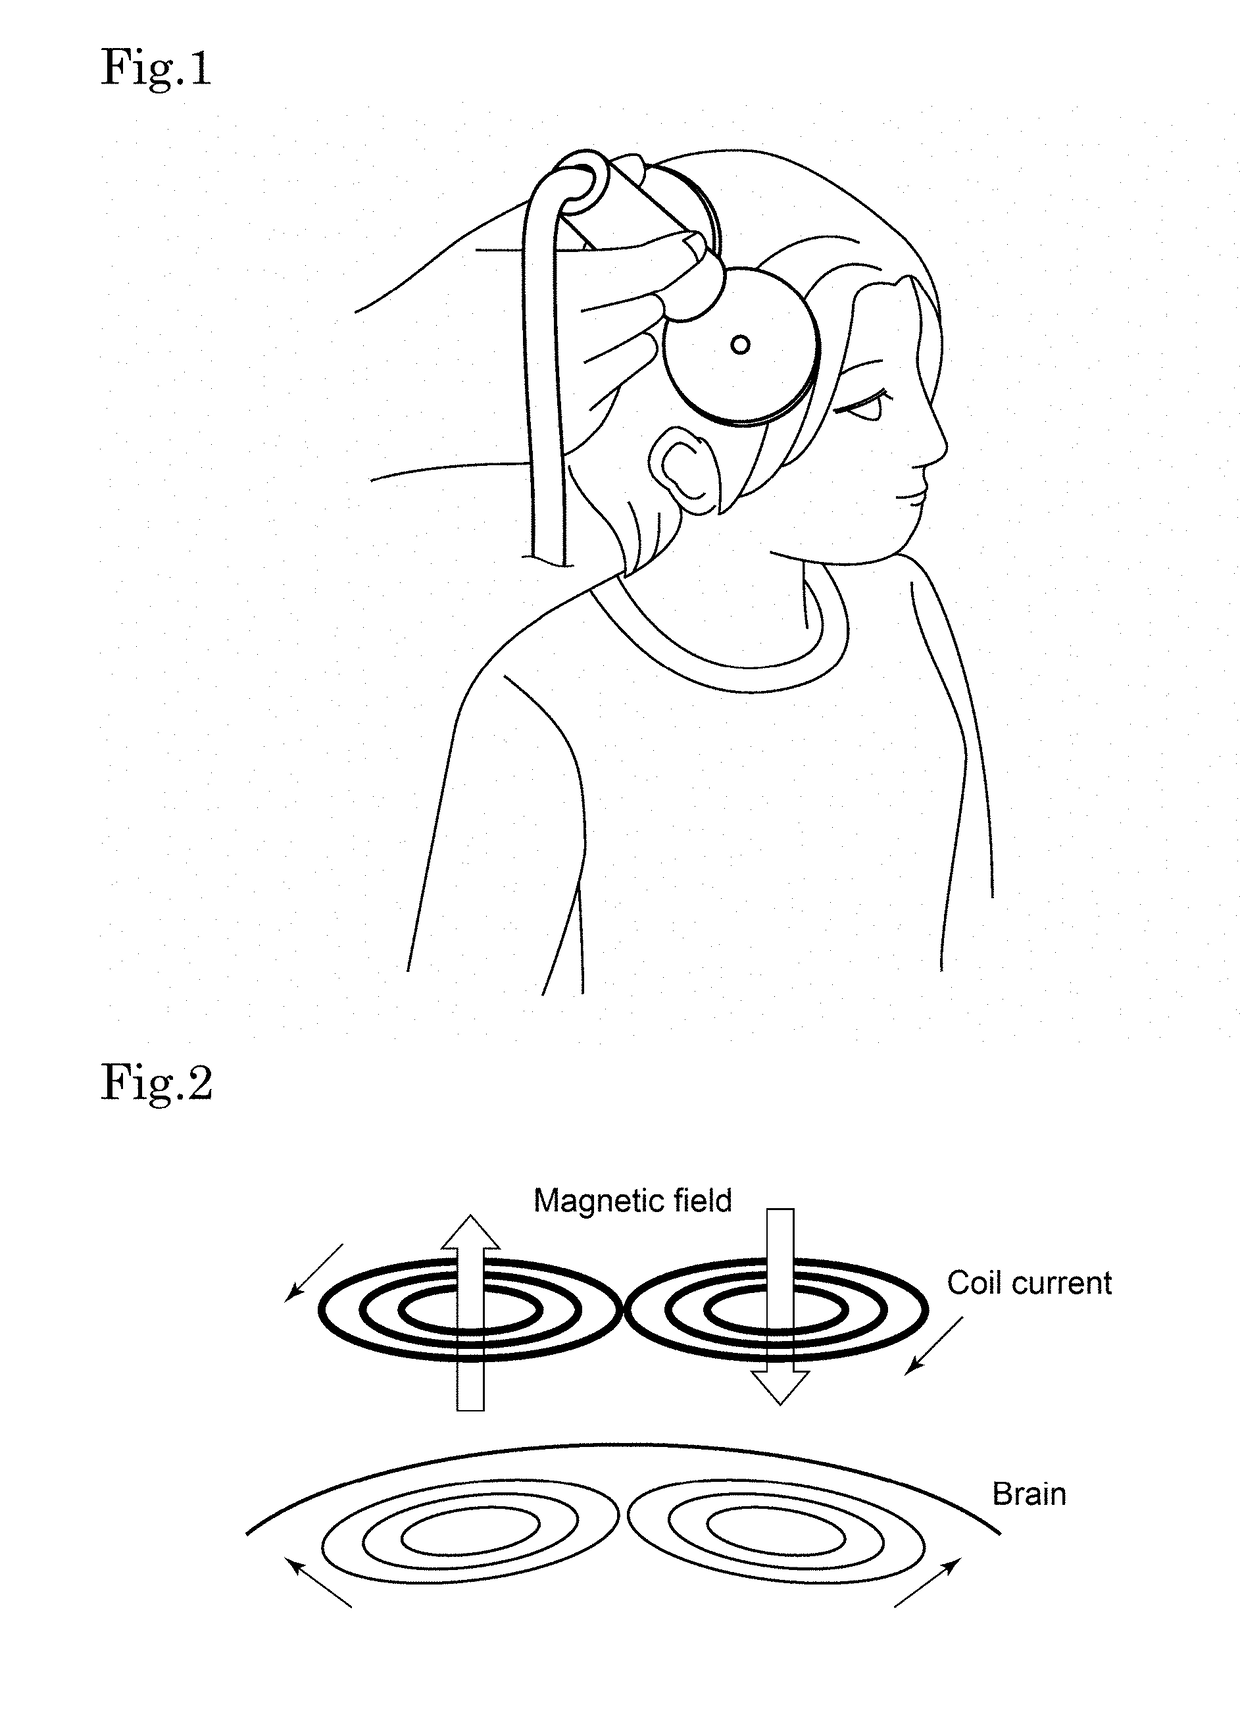 Coil, and magnetic stimulation device using the coil